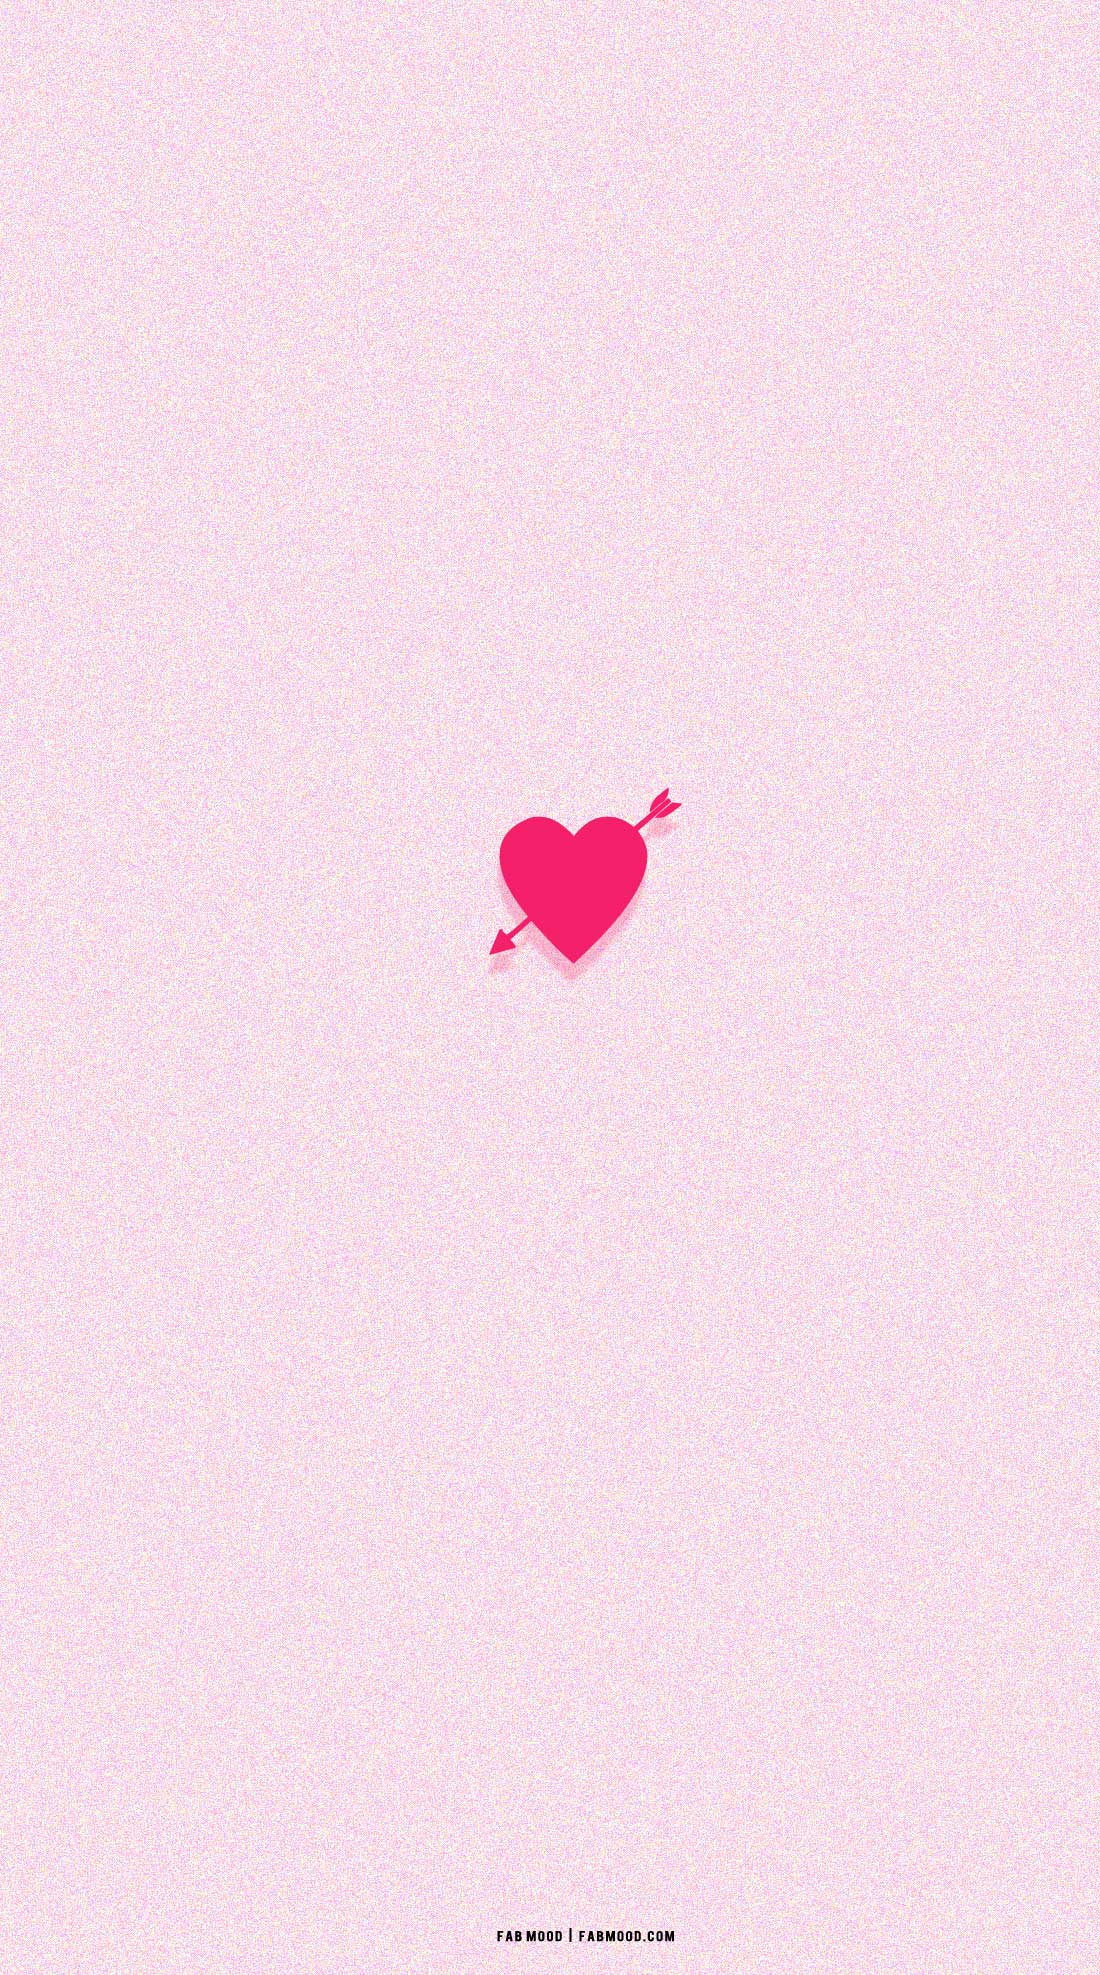 valentine's day wallpaper iphone, aesthetic valentine's day wallpaper, valentines day wallpaper, valentine's day wallpaper cute, valentines wallpaper ideas, valentines wallpaper iphone, valentines wallpaper phone, aesthetic valentine wallpaper